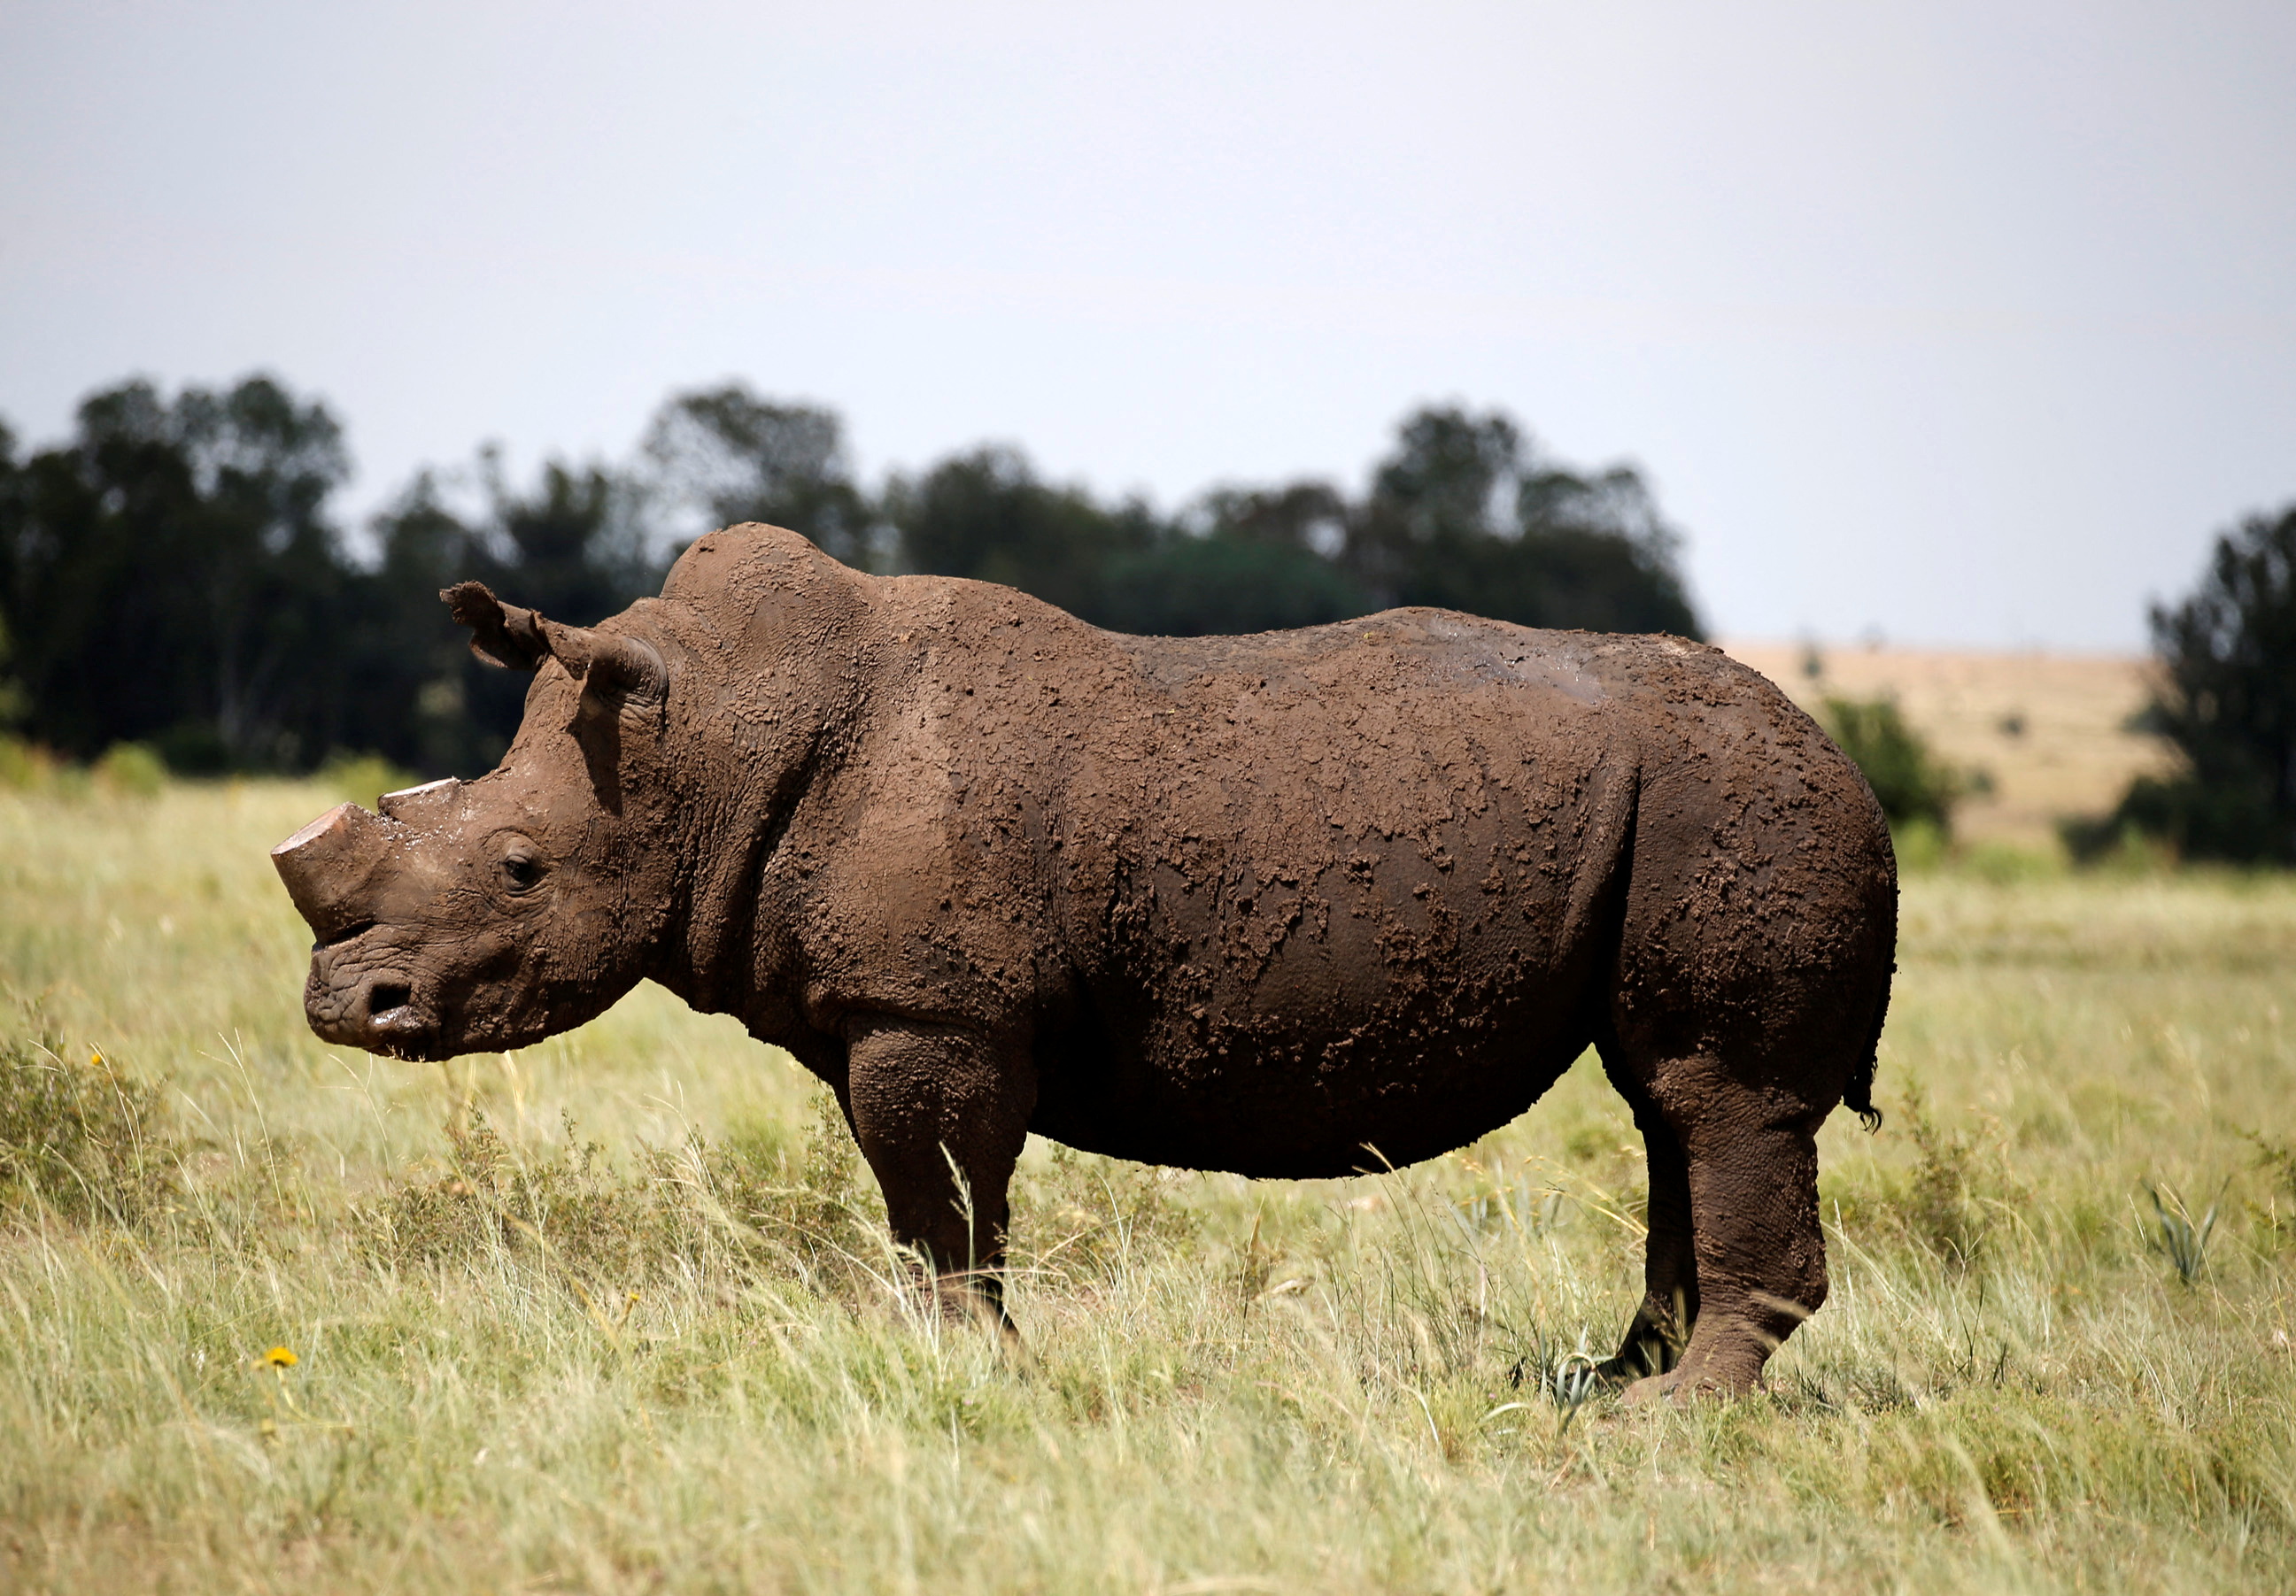 A black rhino is seen after it was dehorned in an effort to deter the poaching of one of the world's endangered species, at a farm outside Klerksdorp